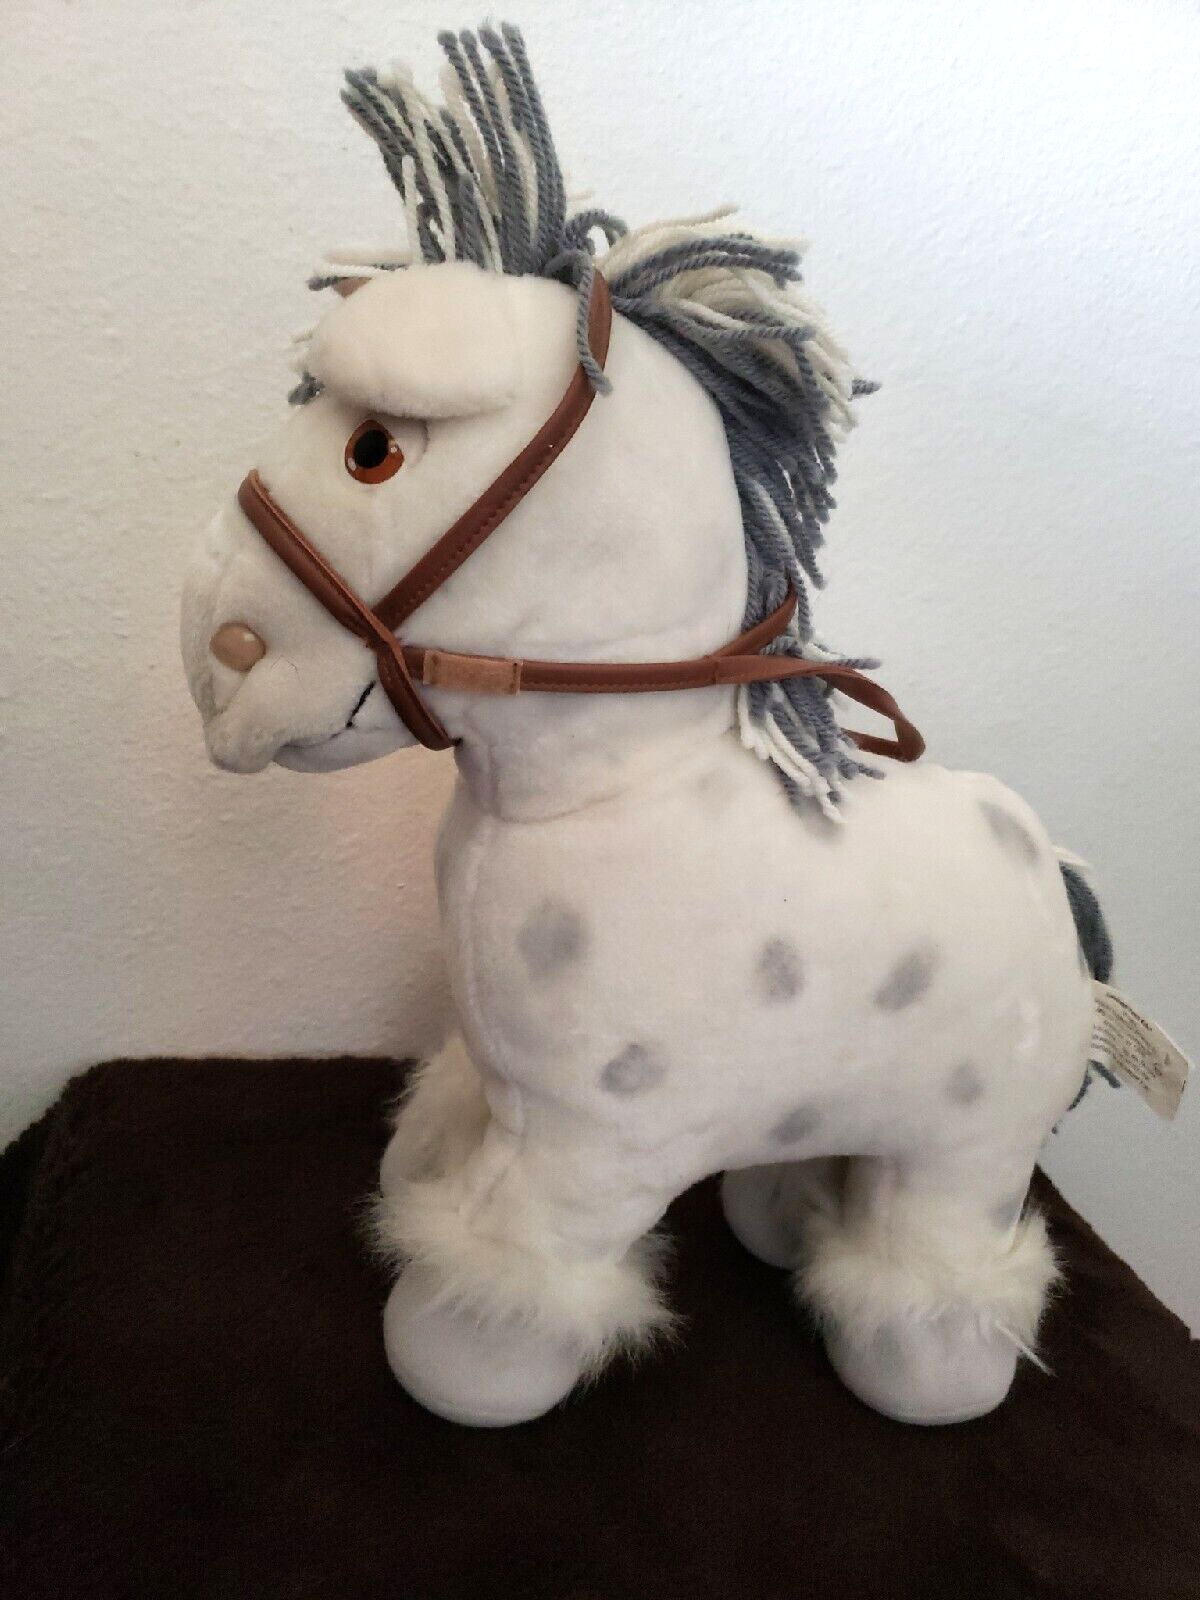 Primary image for 1984 CPK Cabbage Patch Kids Horse Pony Plush Stuffed Animal White Grey Spots